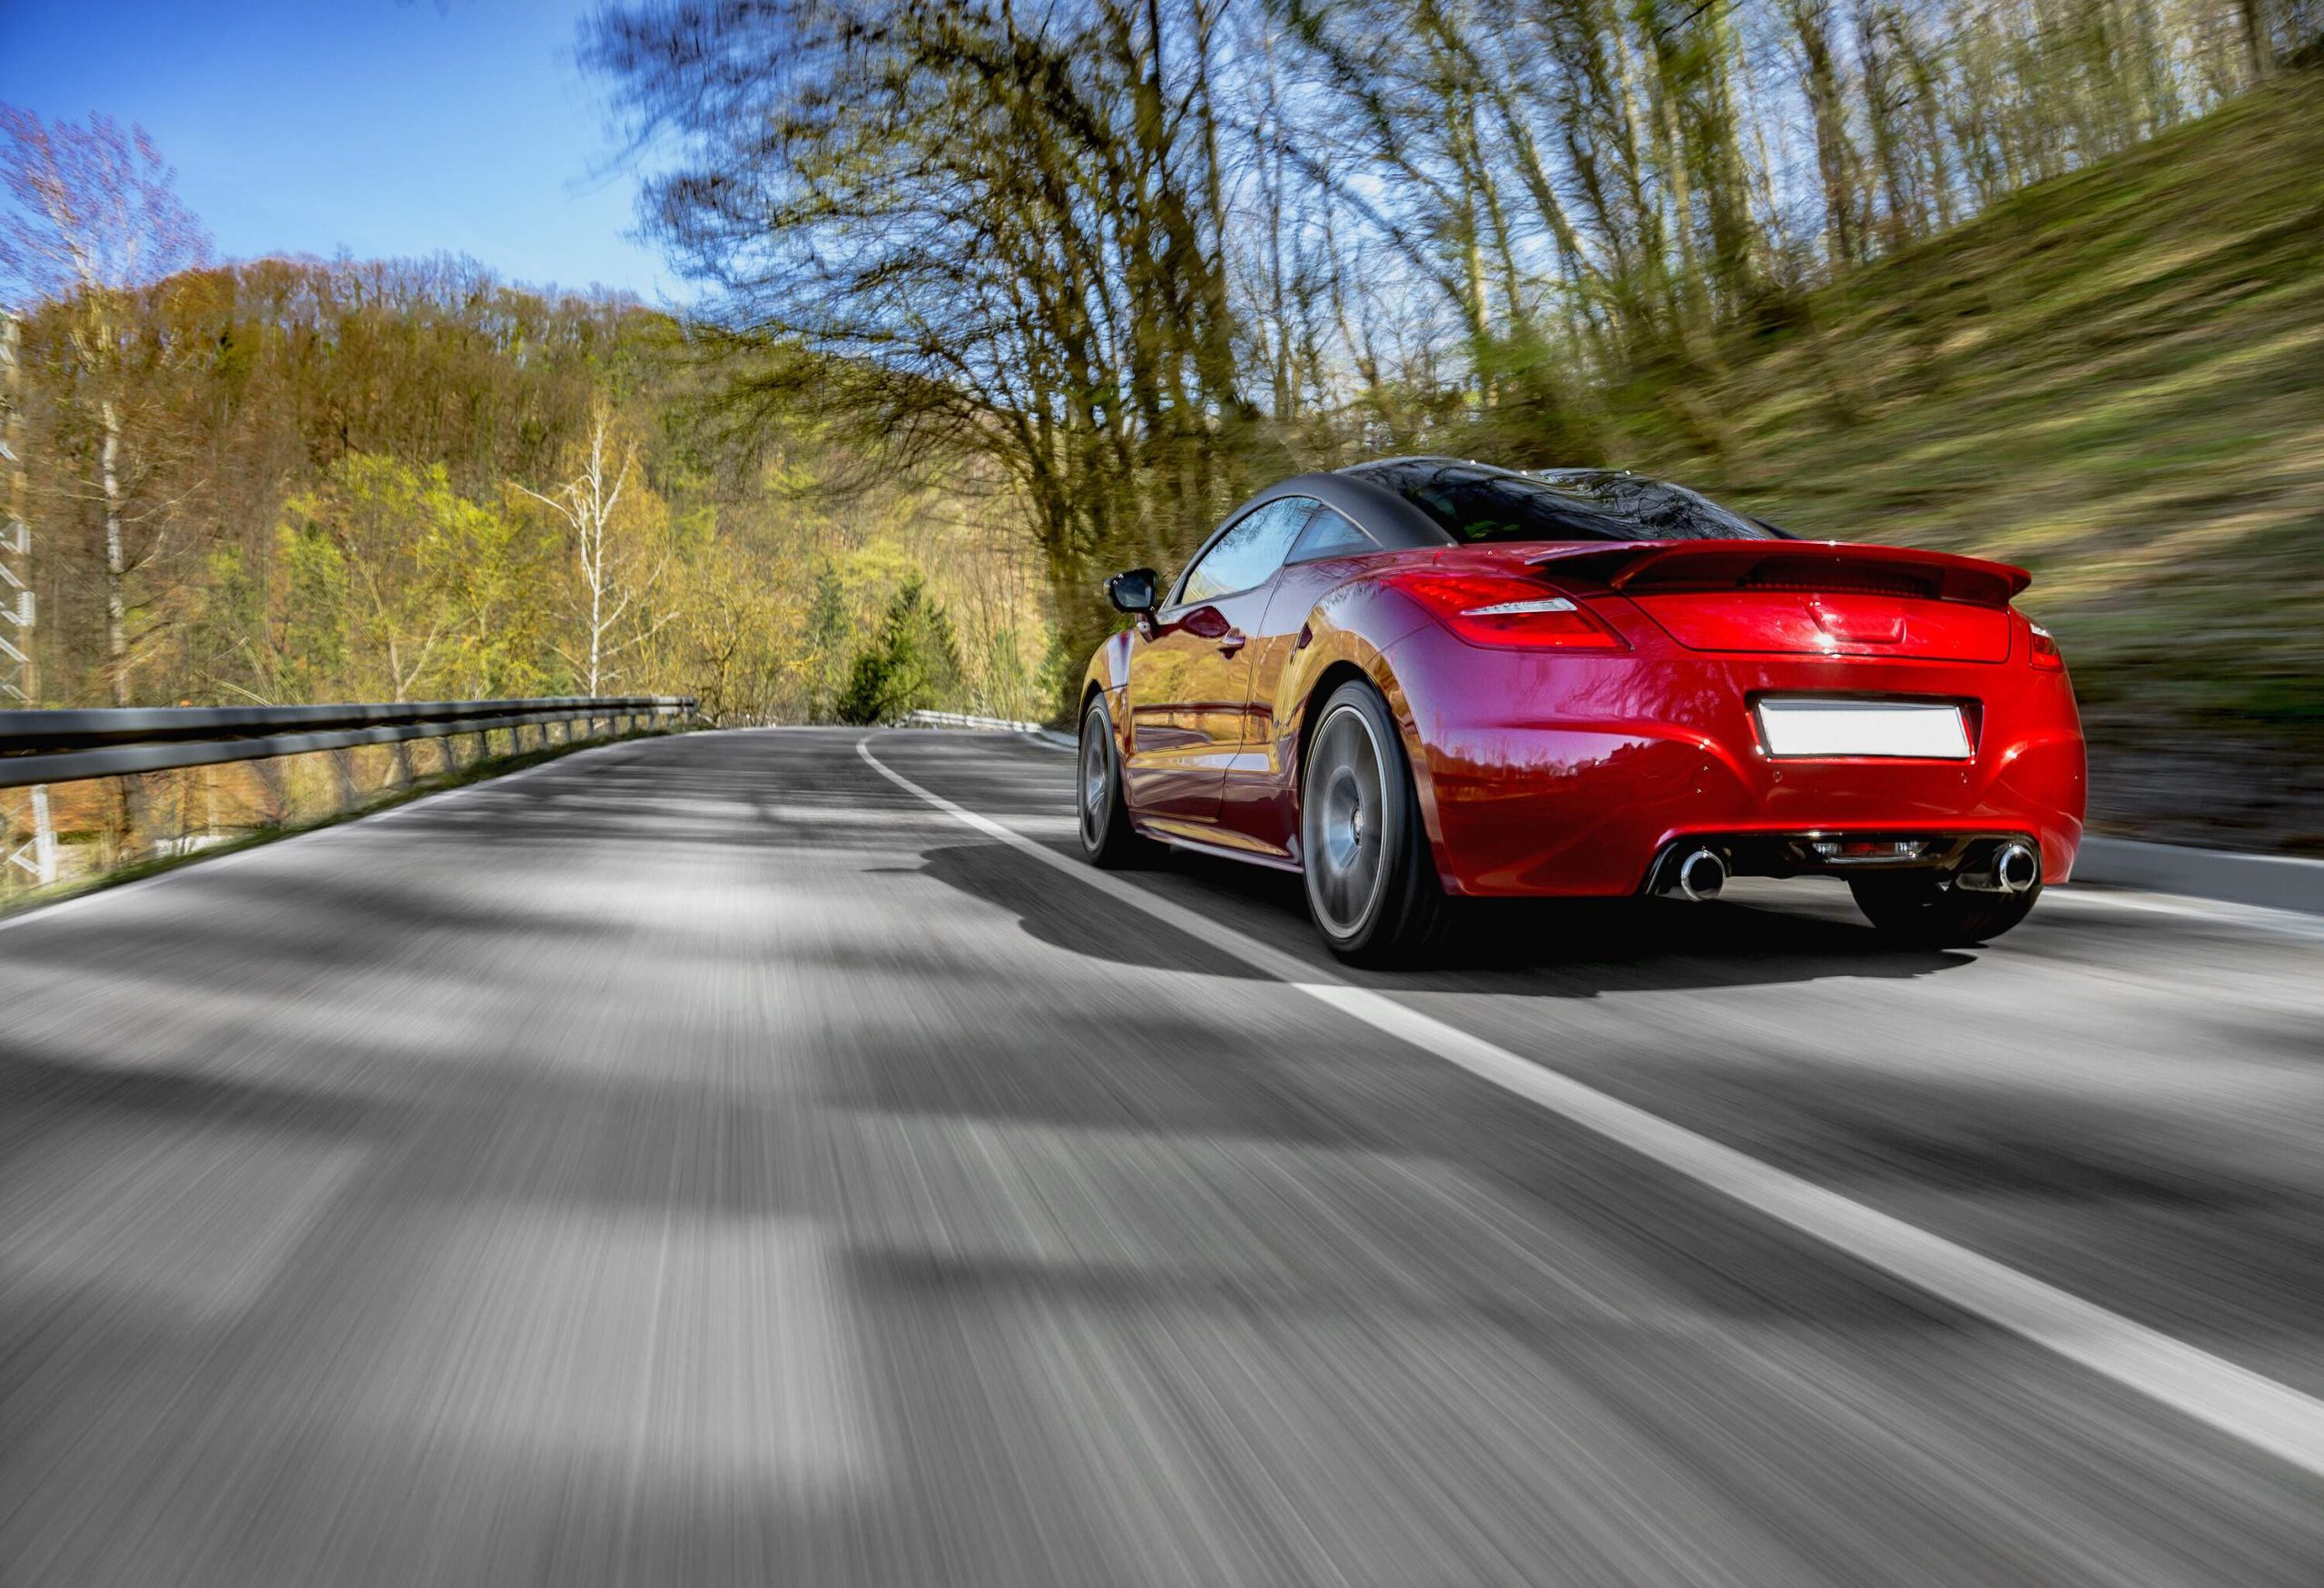 A vibrant red sports car speeding down the open road, exuding power and excitement with its sleek design and thrilling performance.